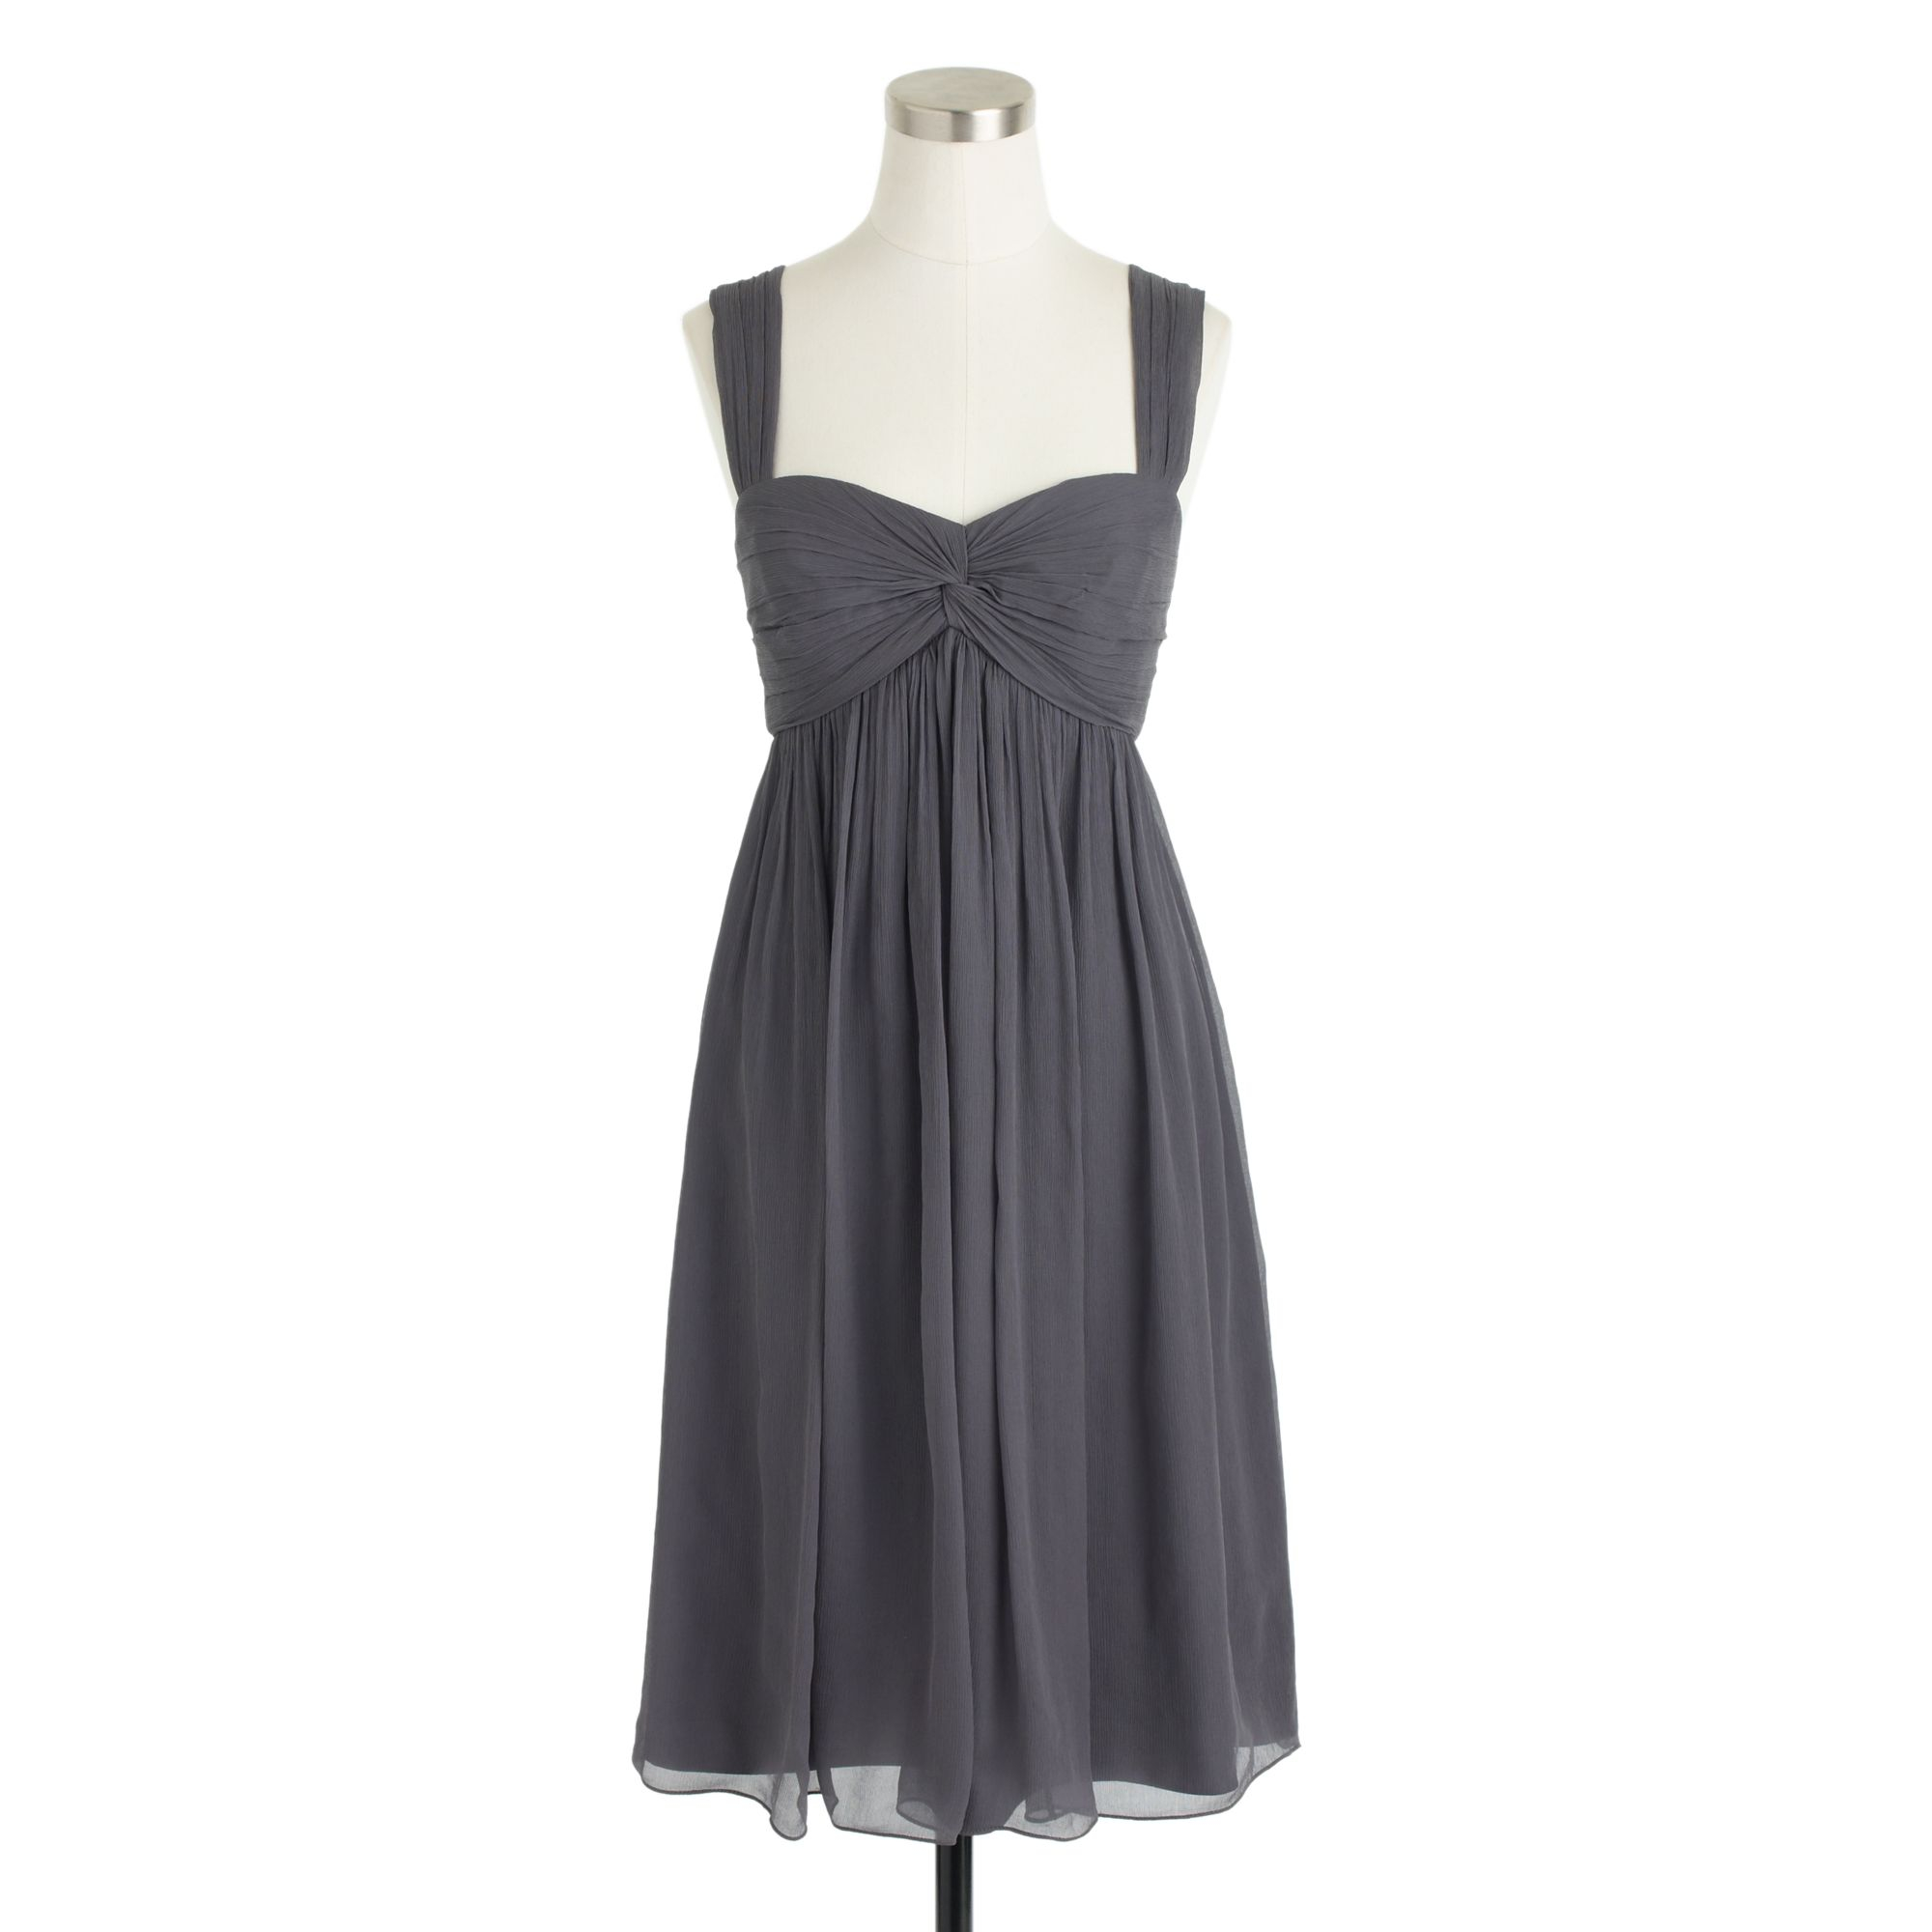 J.crew Petite Rory Dress in Super 120s Wool in Gray (smoky charcoal) | Lyst